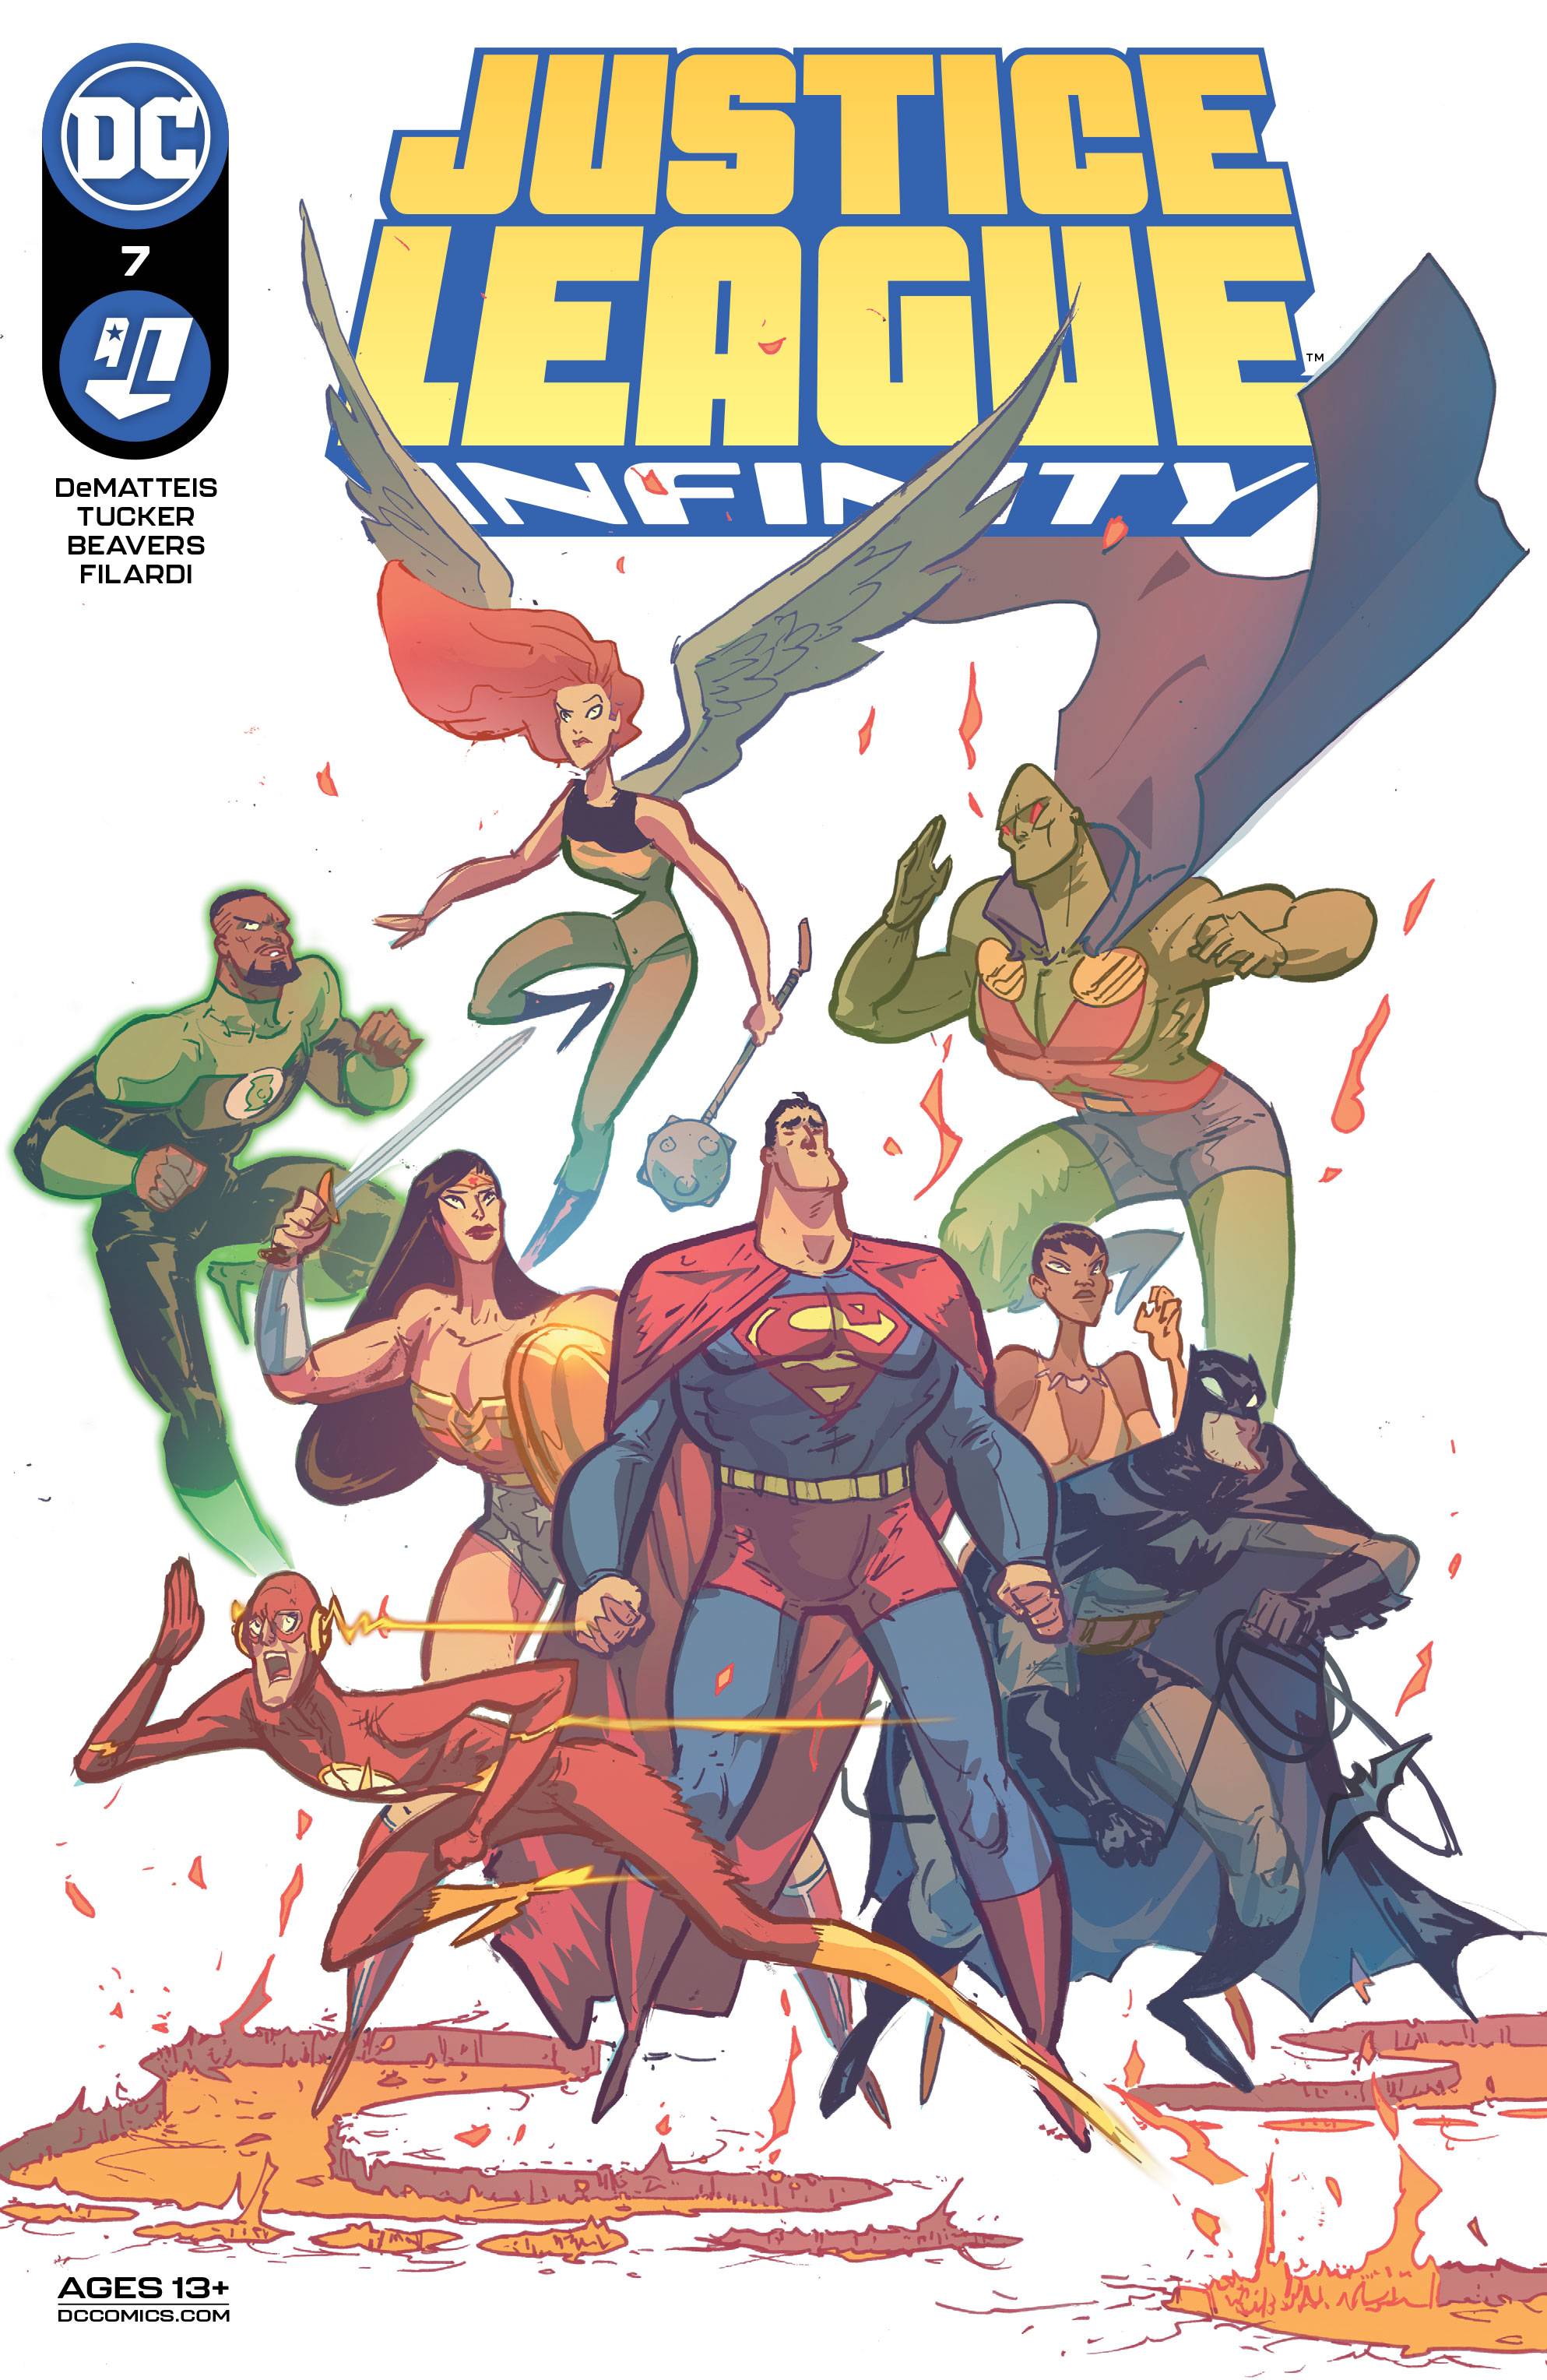 JUSTICE LEAGUE INFINITY #7 (OF 7)